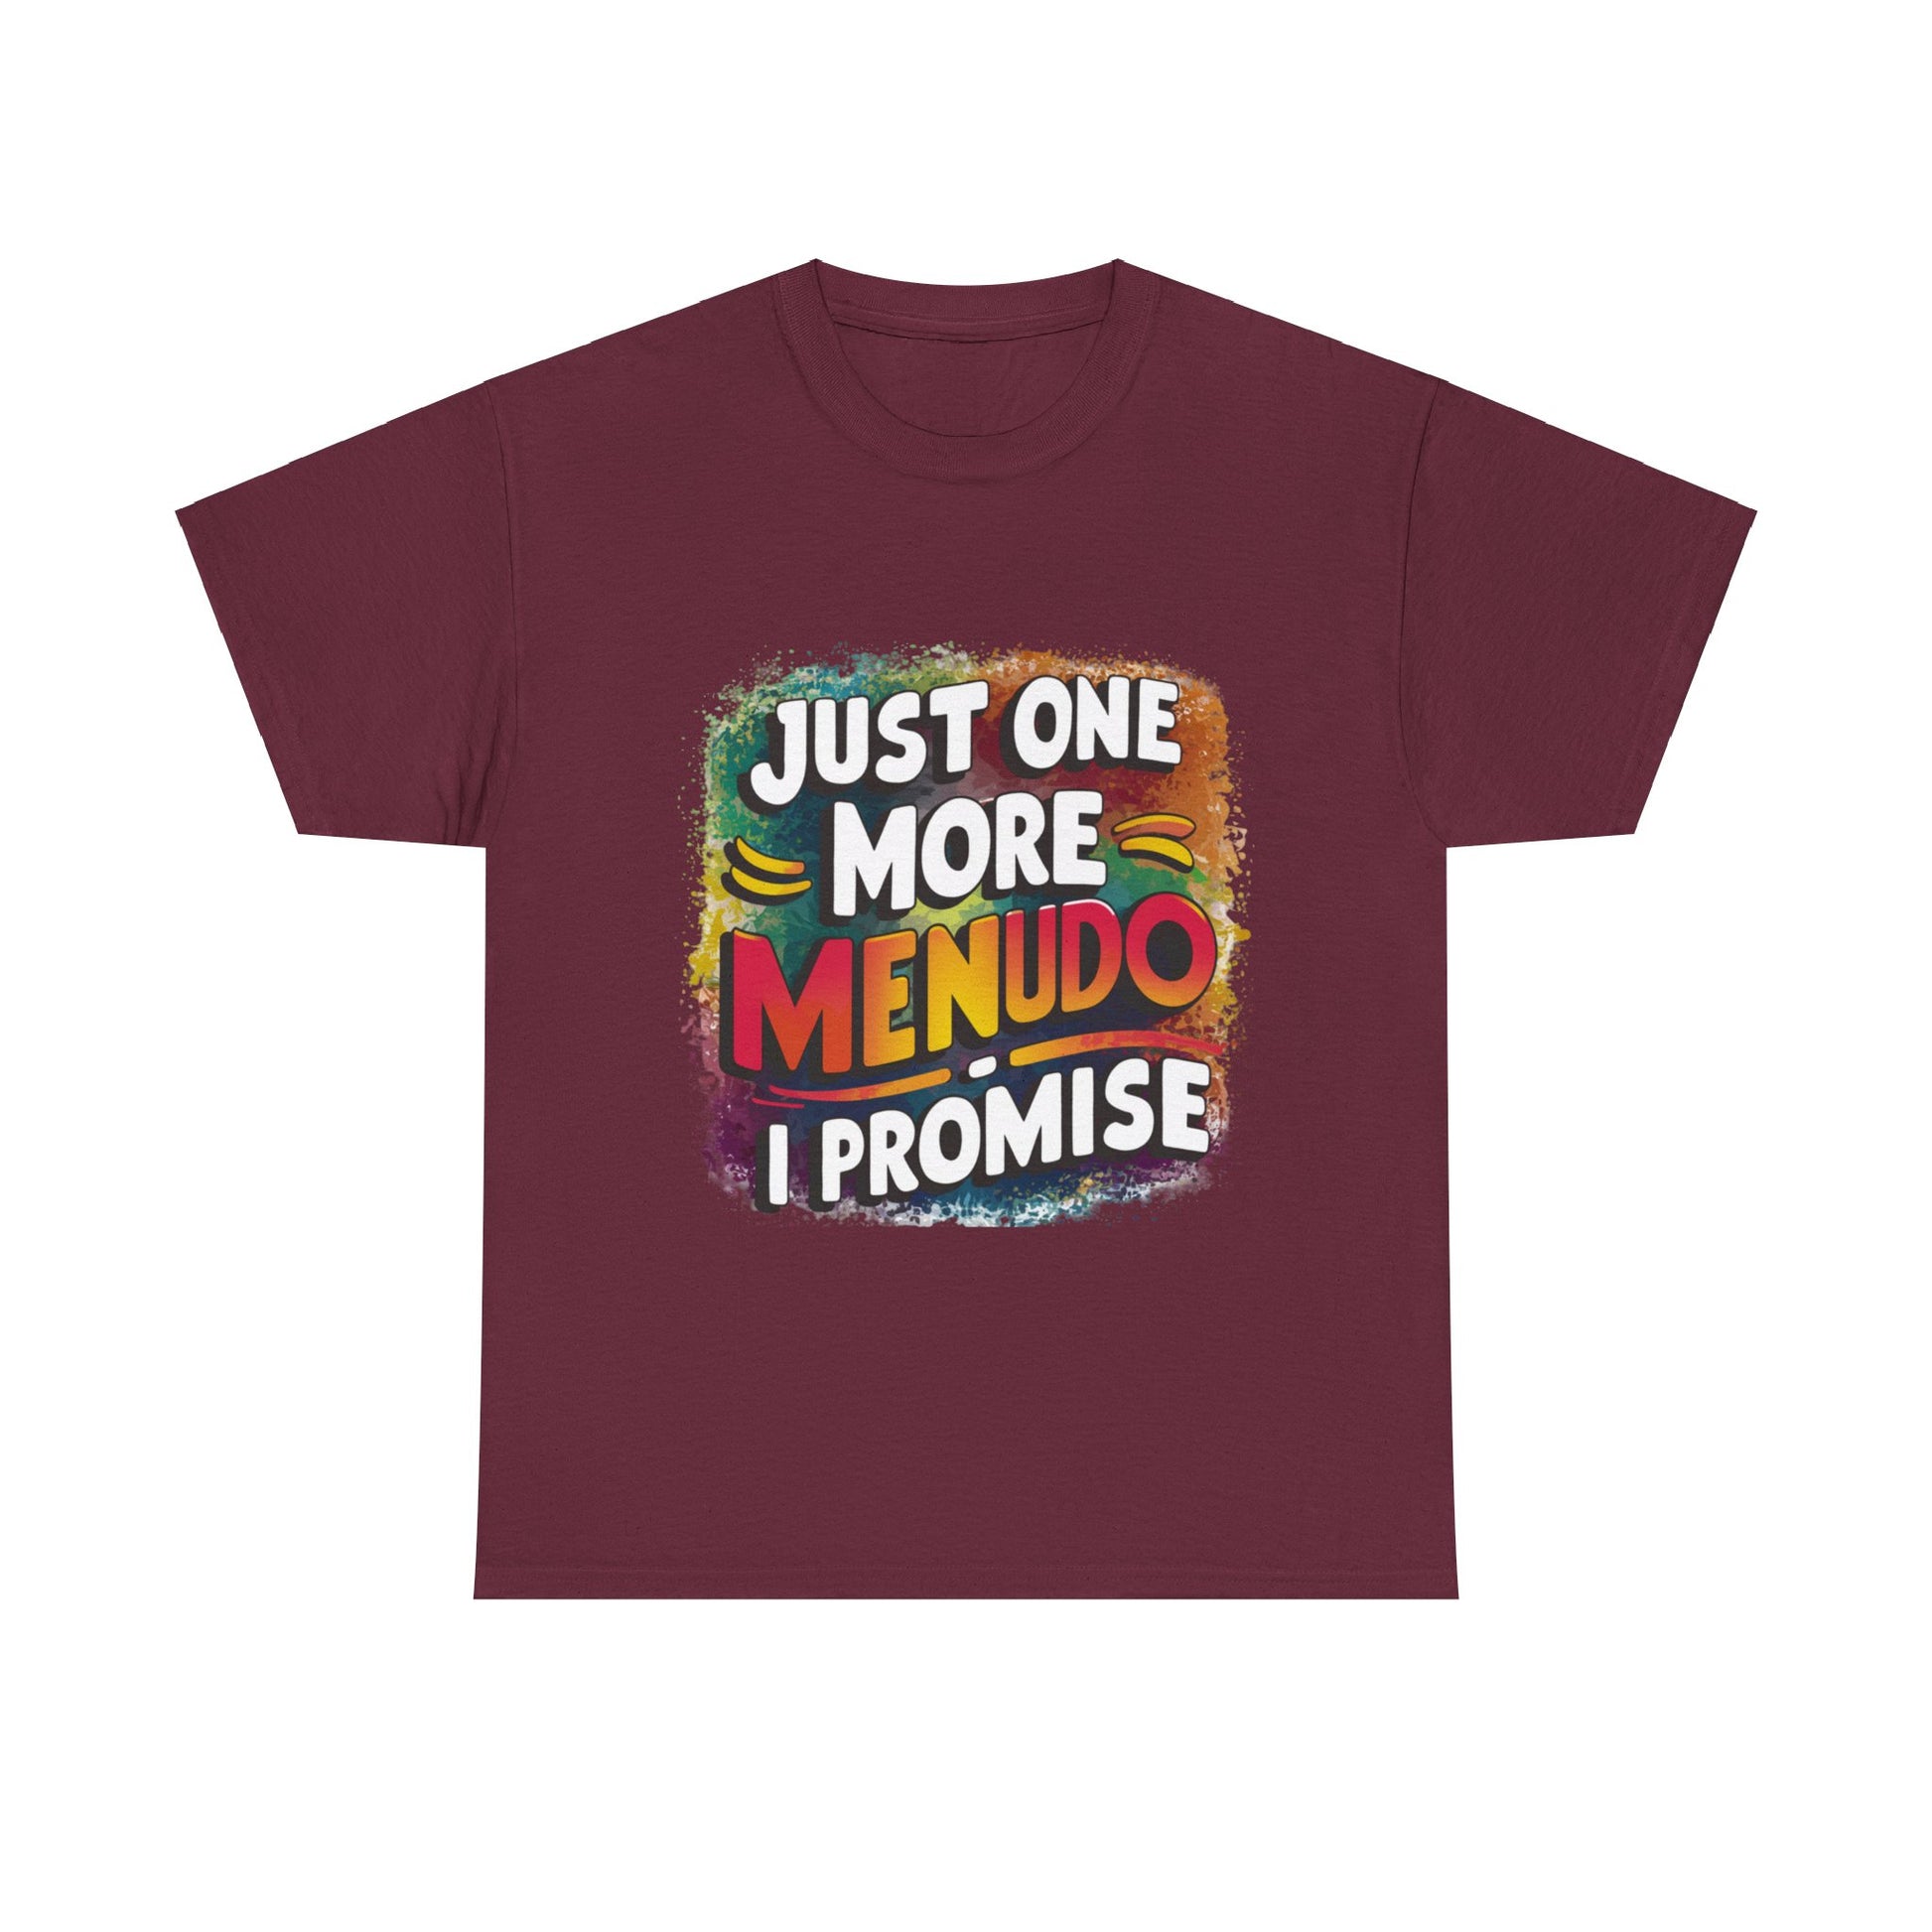 Just One More Menudo I Promise Mexican Food Graphic Unisex Heavy Cotton Tee Cotton Funny Humorous Graphic Soft Premium Unisex Men Women Maroon T-shirt Birthday Gift-5